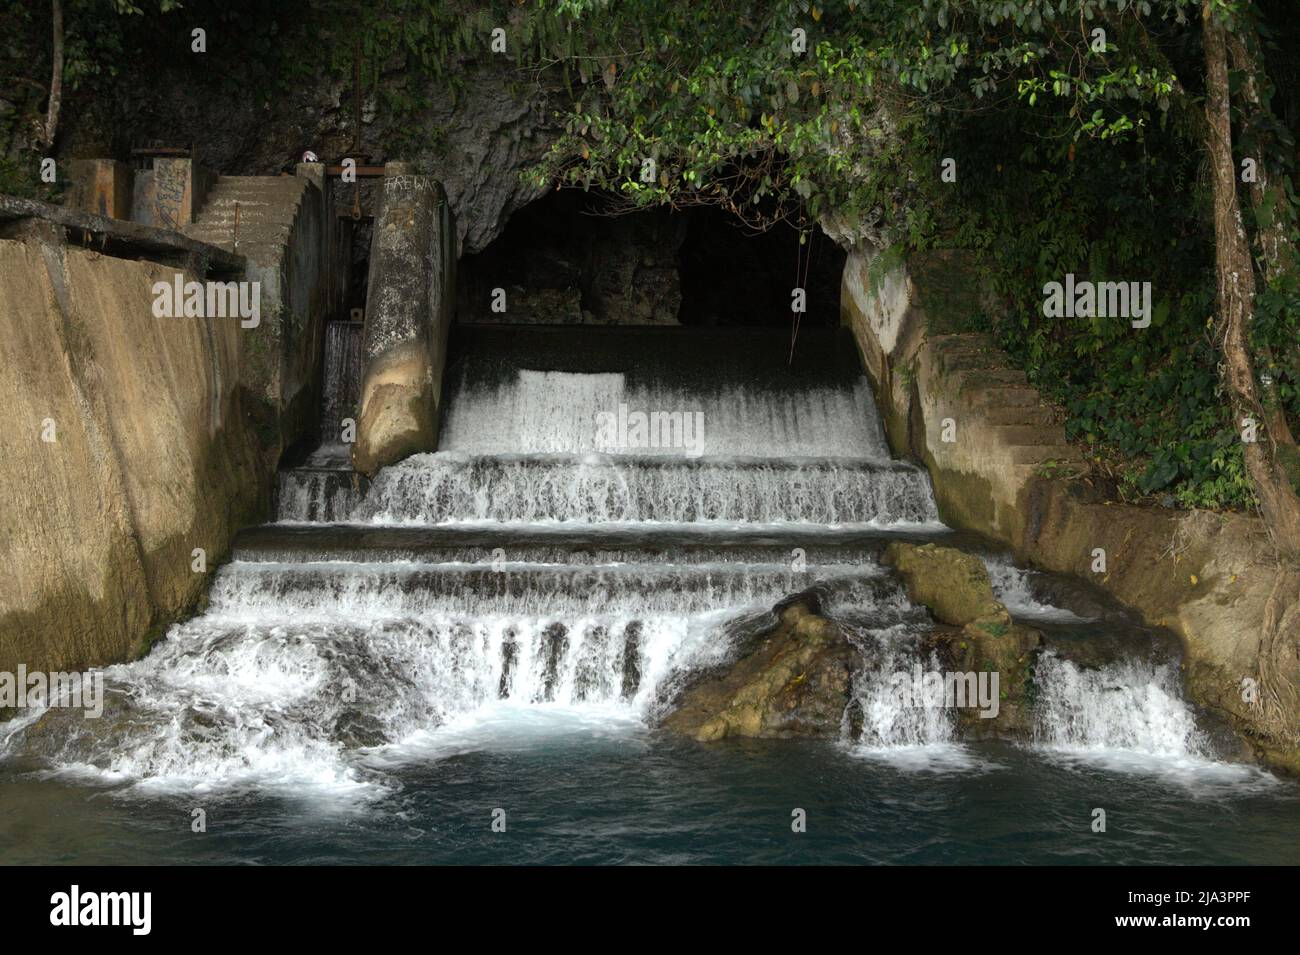 A waterfall and dam at limestone caves of Waikelo Sawah, a rare water source in Sumba—an island regularly hit by drought, which is located in Tema Tana village, East Wewewa, Southwest Sumba, East Nusa Tenggara, Indonesia. Stock Photo